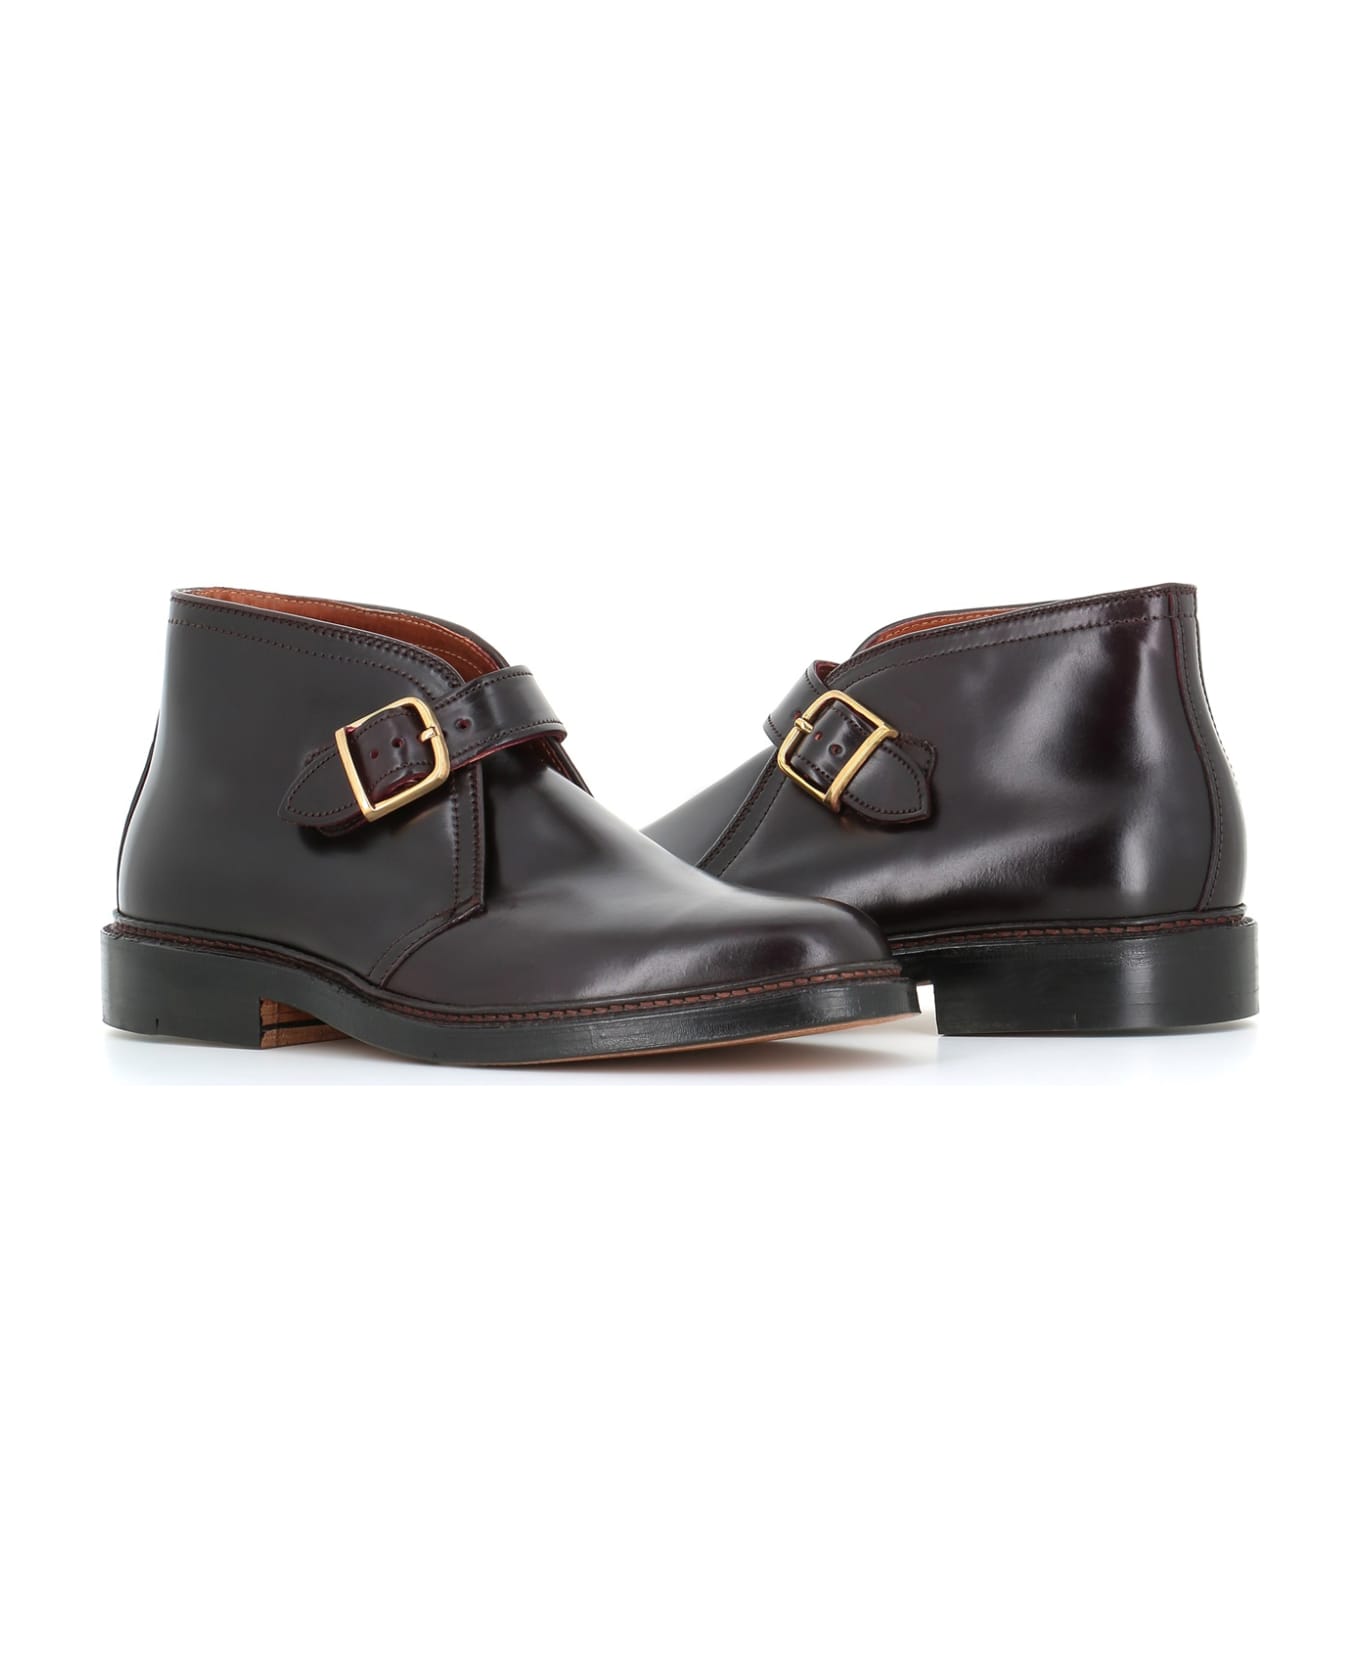 Alden Ankle Boot N6704 - Mahogany ブーツ